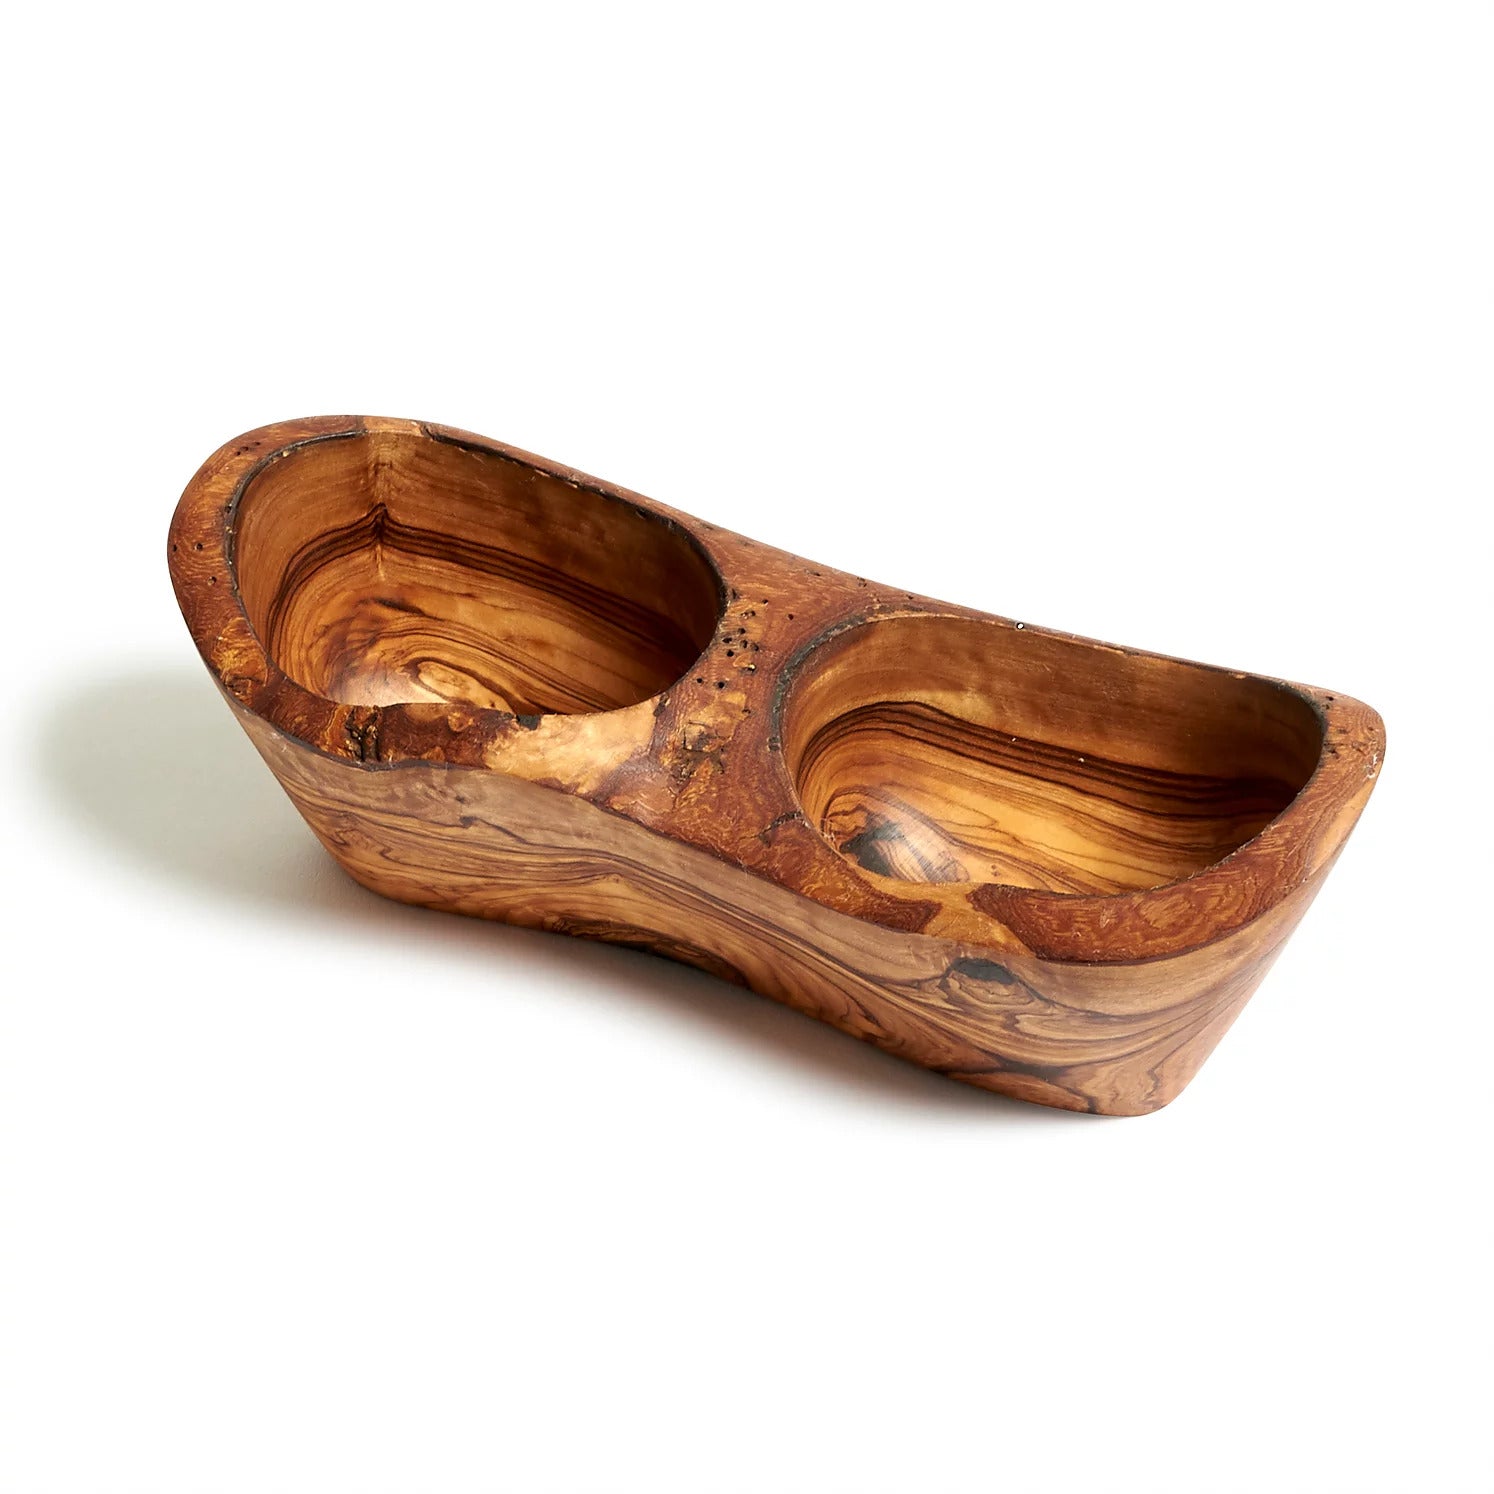 2 Sections Rustic Olive Wood Bowl